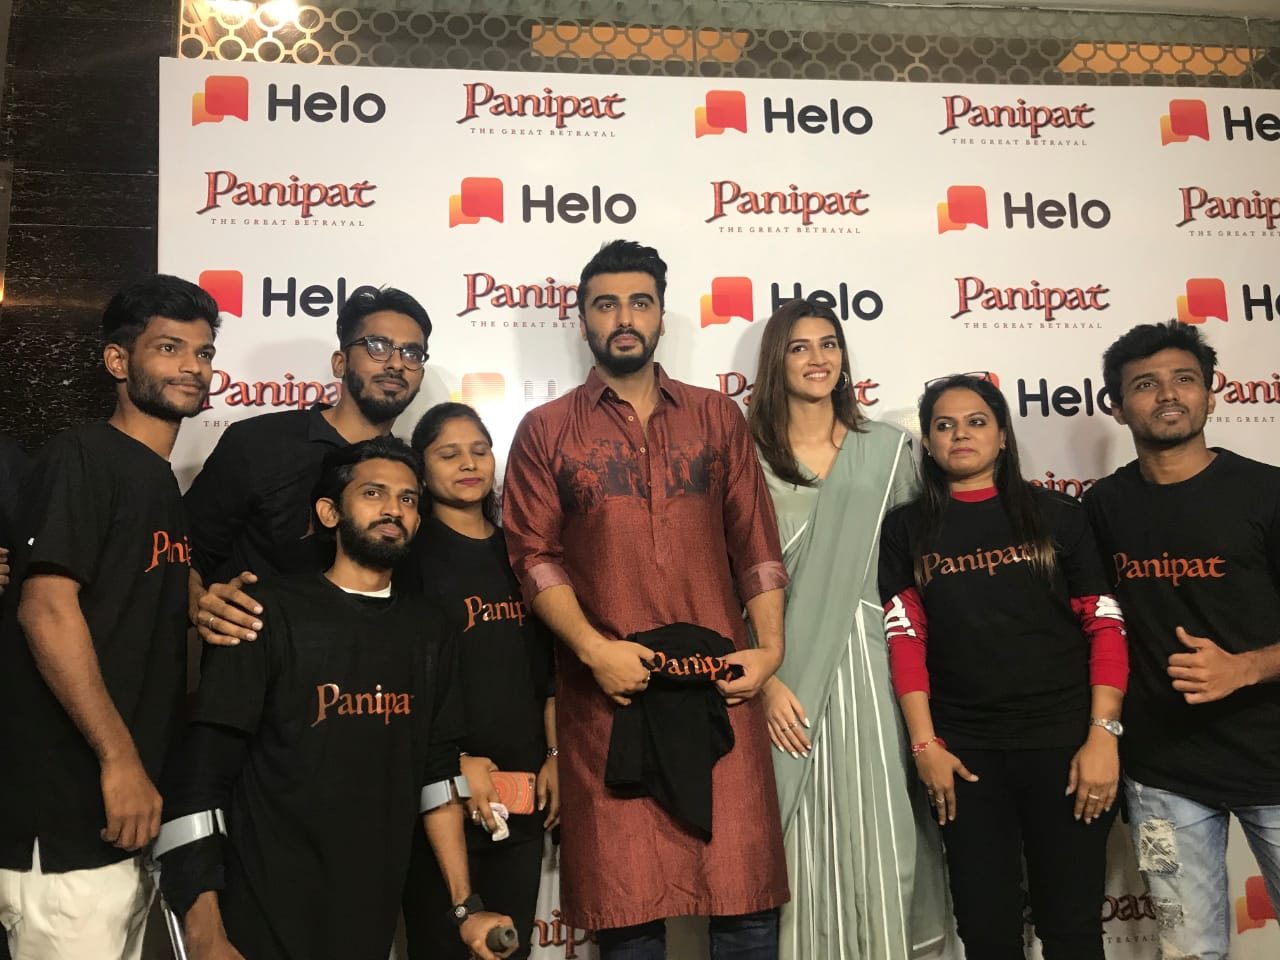 Arjun Kapoor and Kriti Sanon greeting Helo fans at the exclusive premier of their movie Panipat for Helo users -Photo By Sachin Murdeshwar GPN